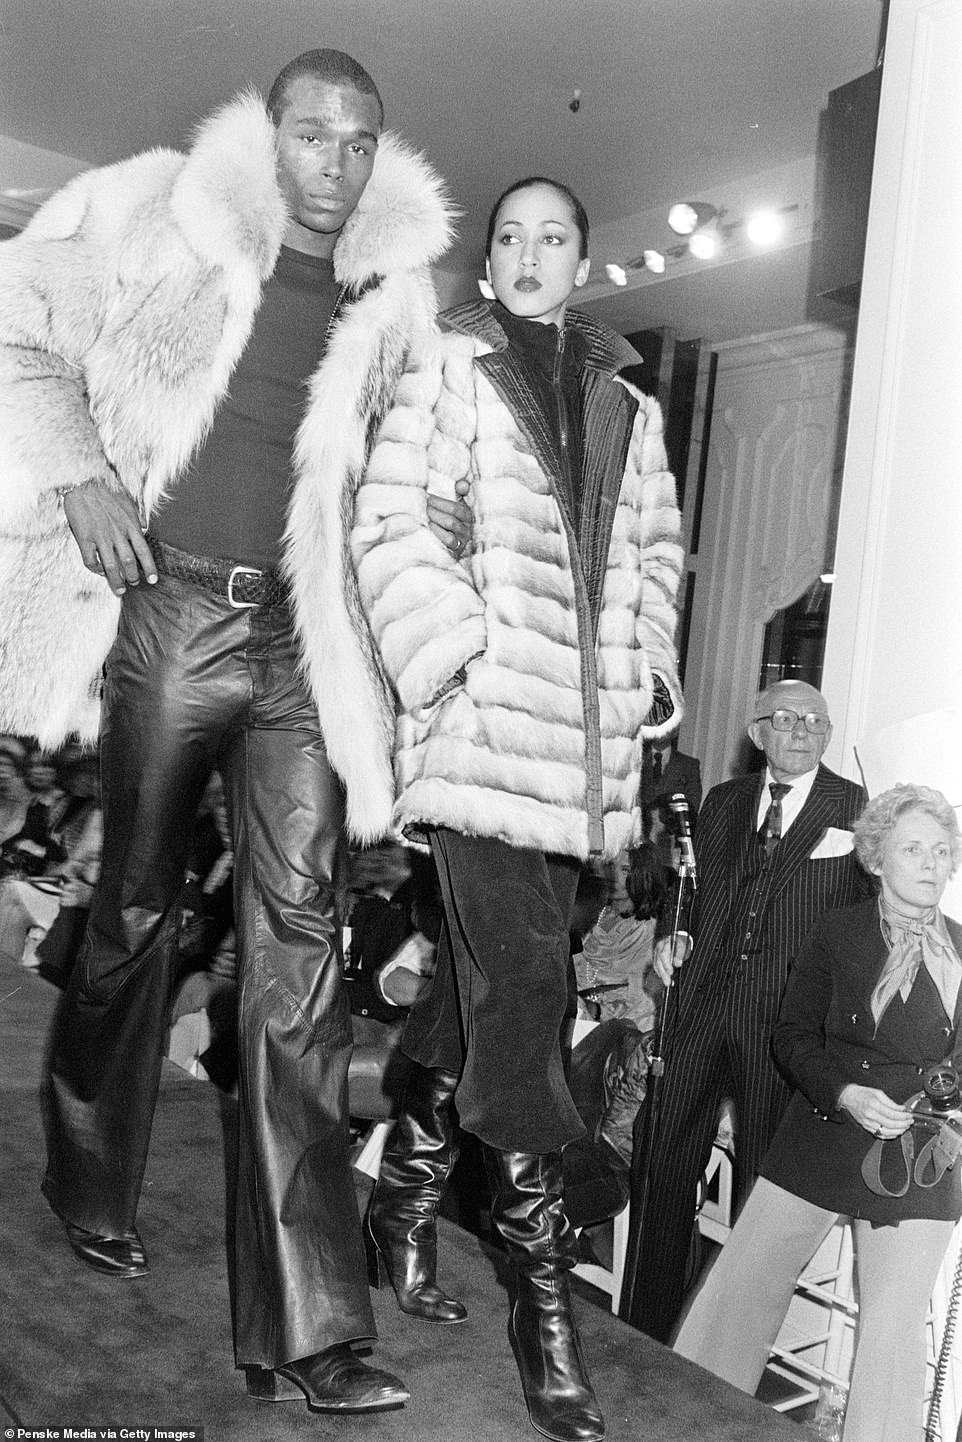 While St Jacques would regularly cut up the floor with such socialites, his most common dance partner was Ebony Fashion Fair model Pat Cleveland, seen here on the runway with her fellow supermodel in 1976